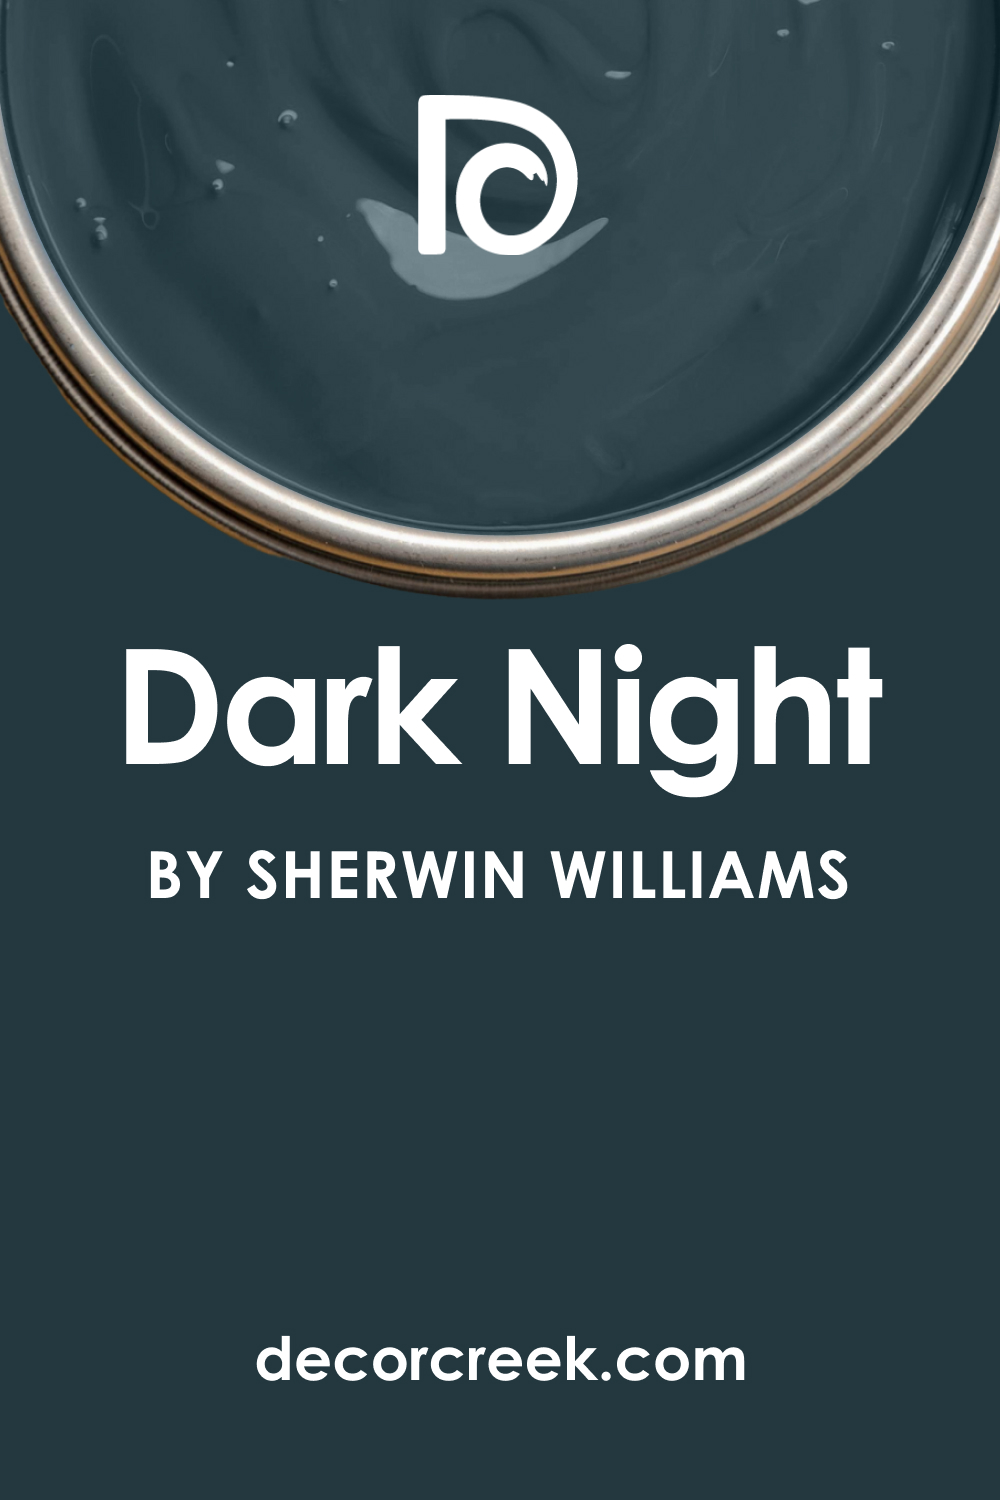 What Kind of Color Is SW Dark Night?